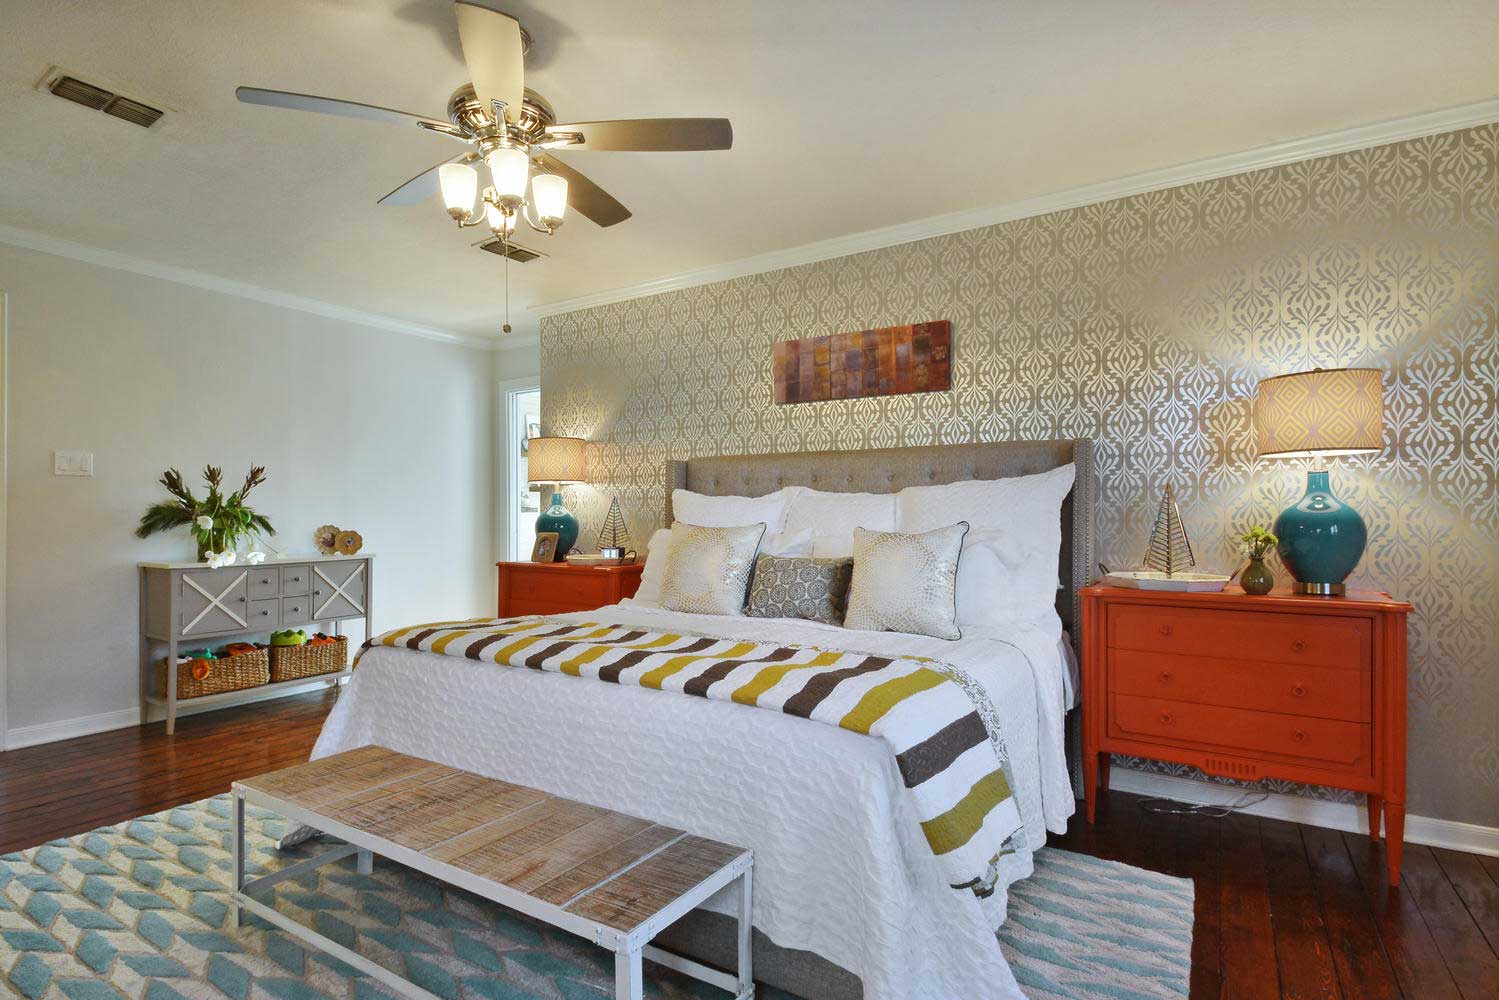 master bedroom with decorative ceiling fan light 